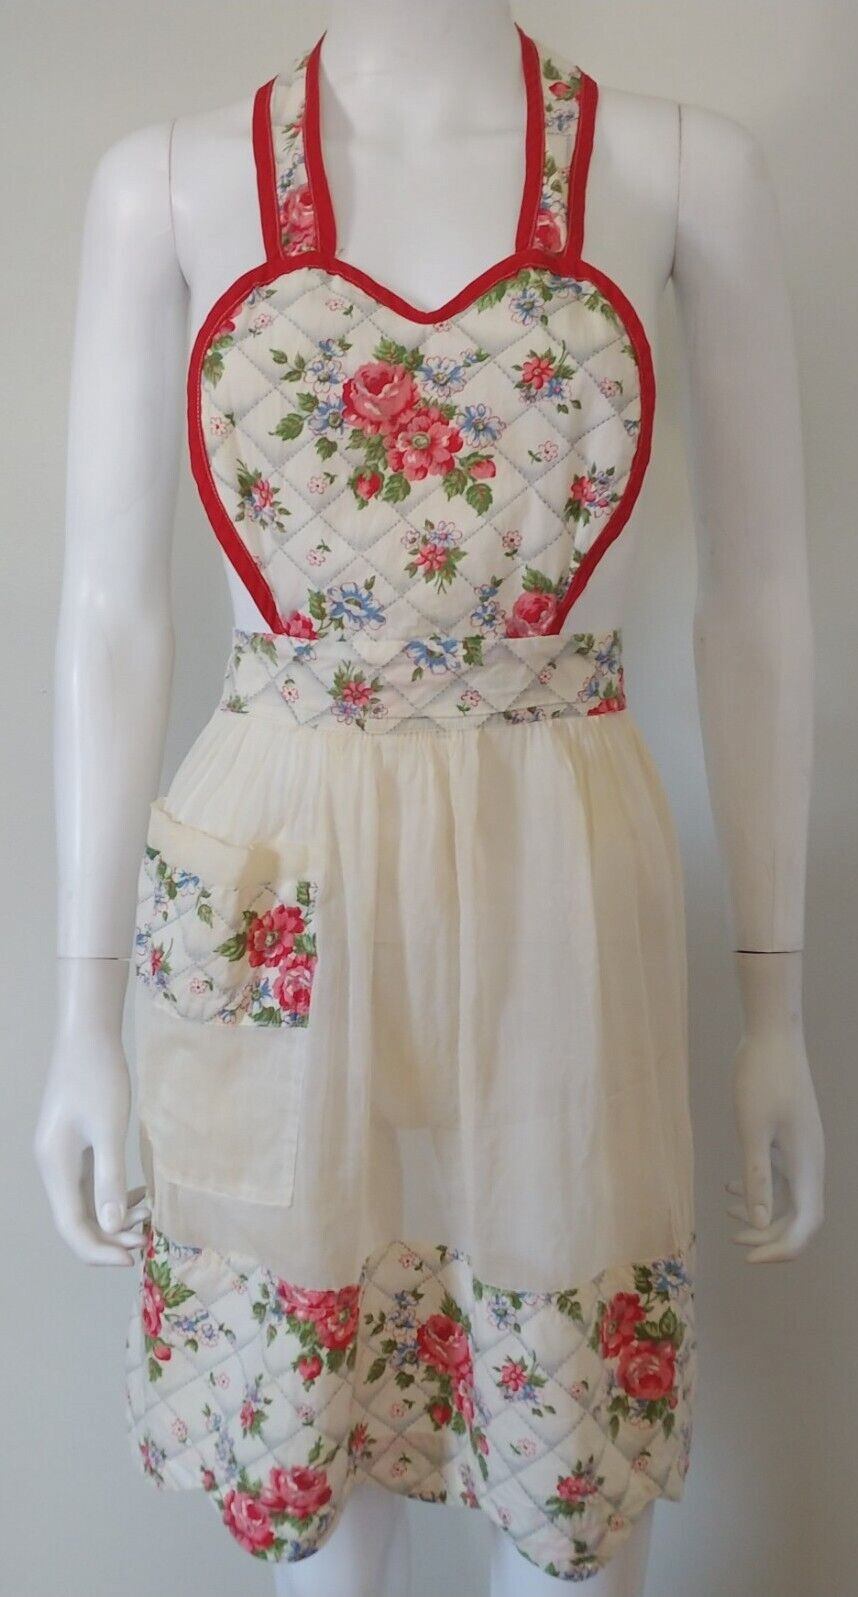 VINTAGE 50s Handmade Apron Pocket Roses ENGLISH floral Pink Cottage Farm country